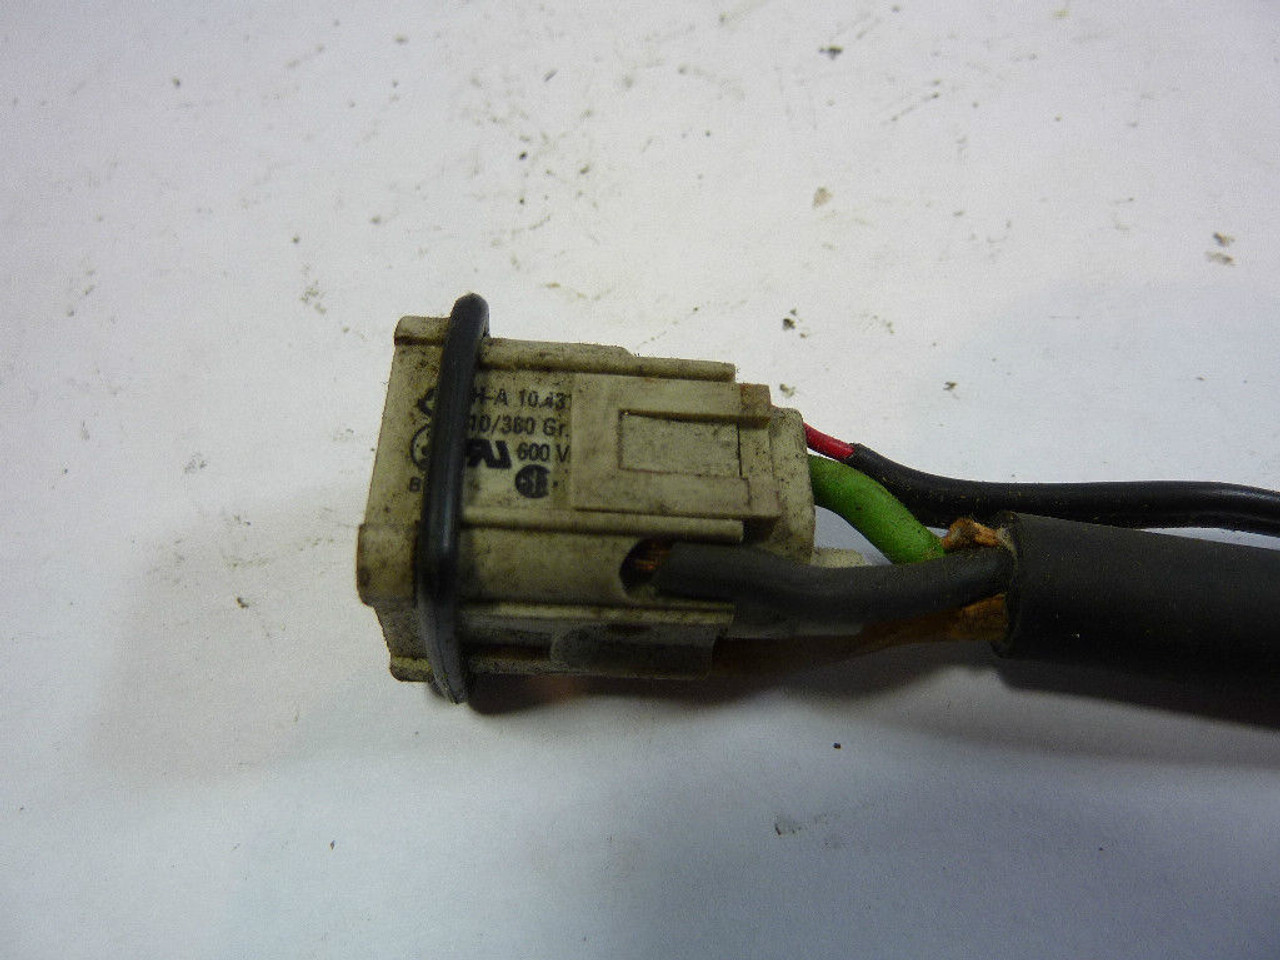 Contact H-A10.4310 Connector Receptacle USED